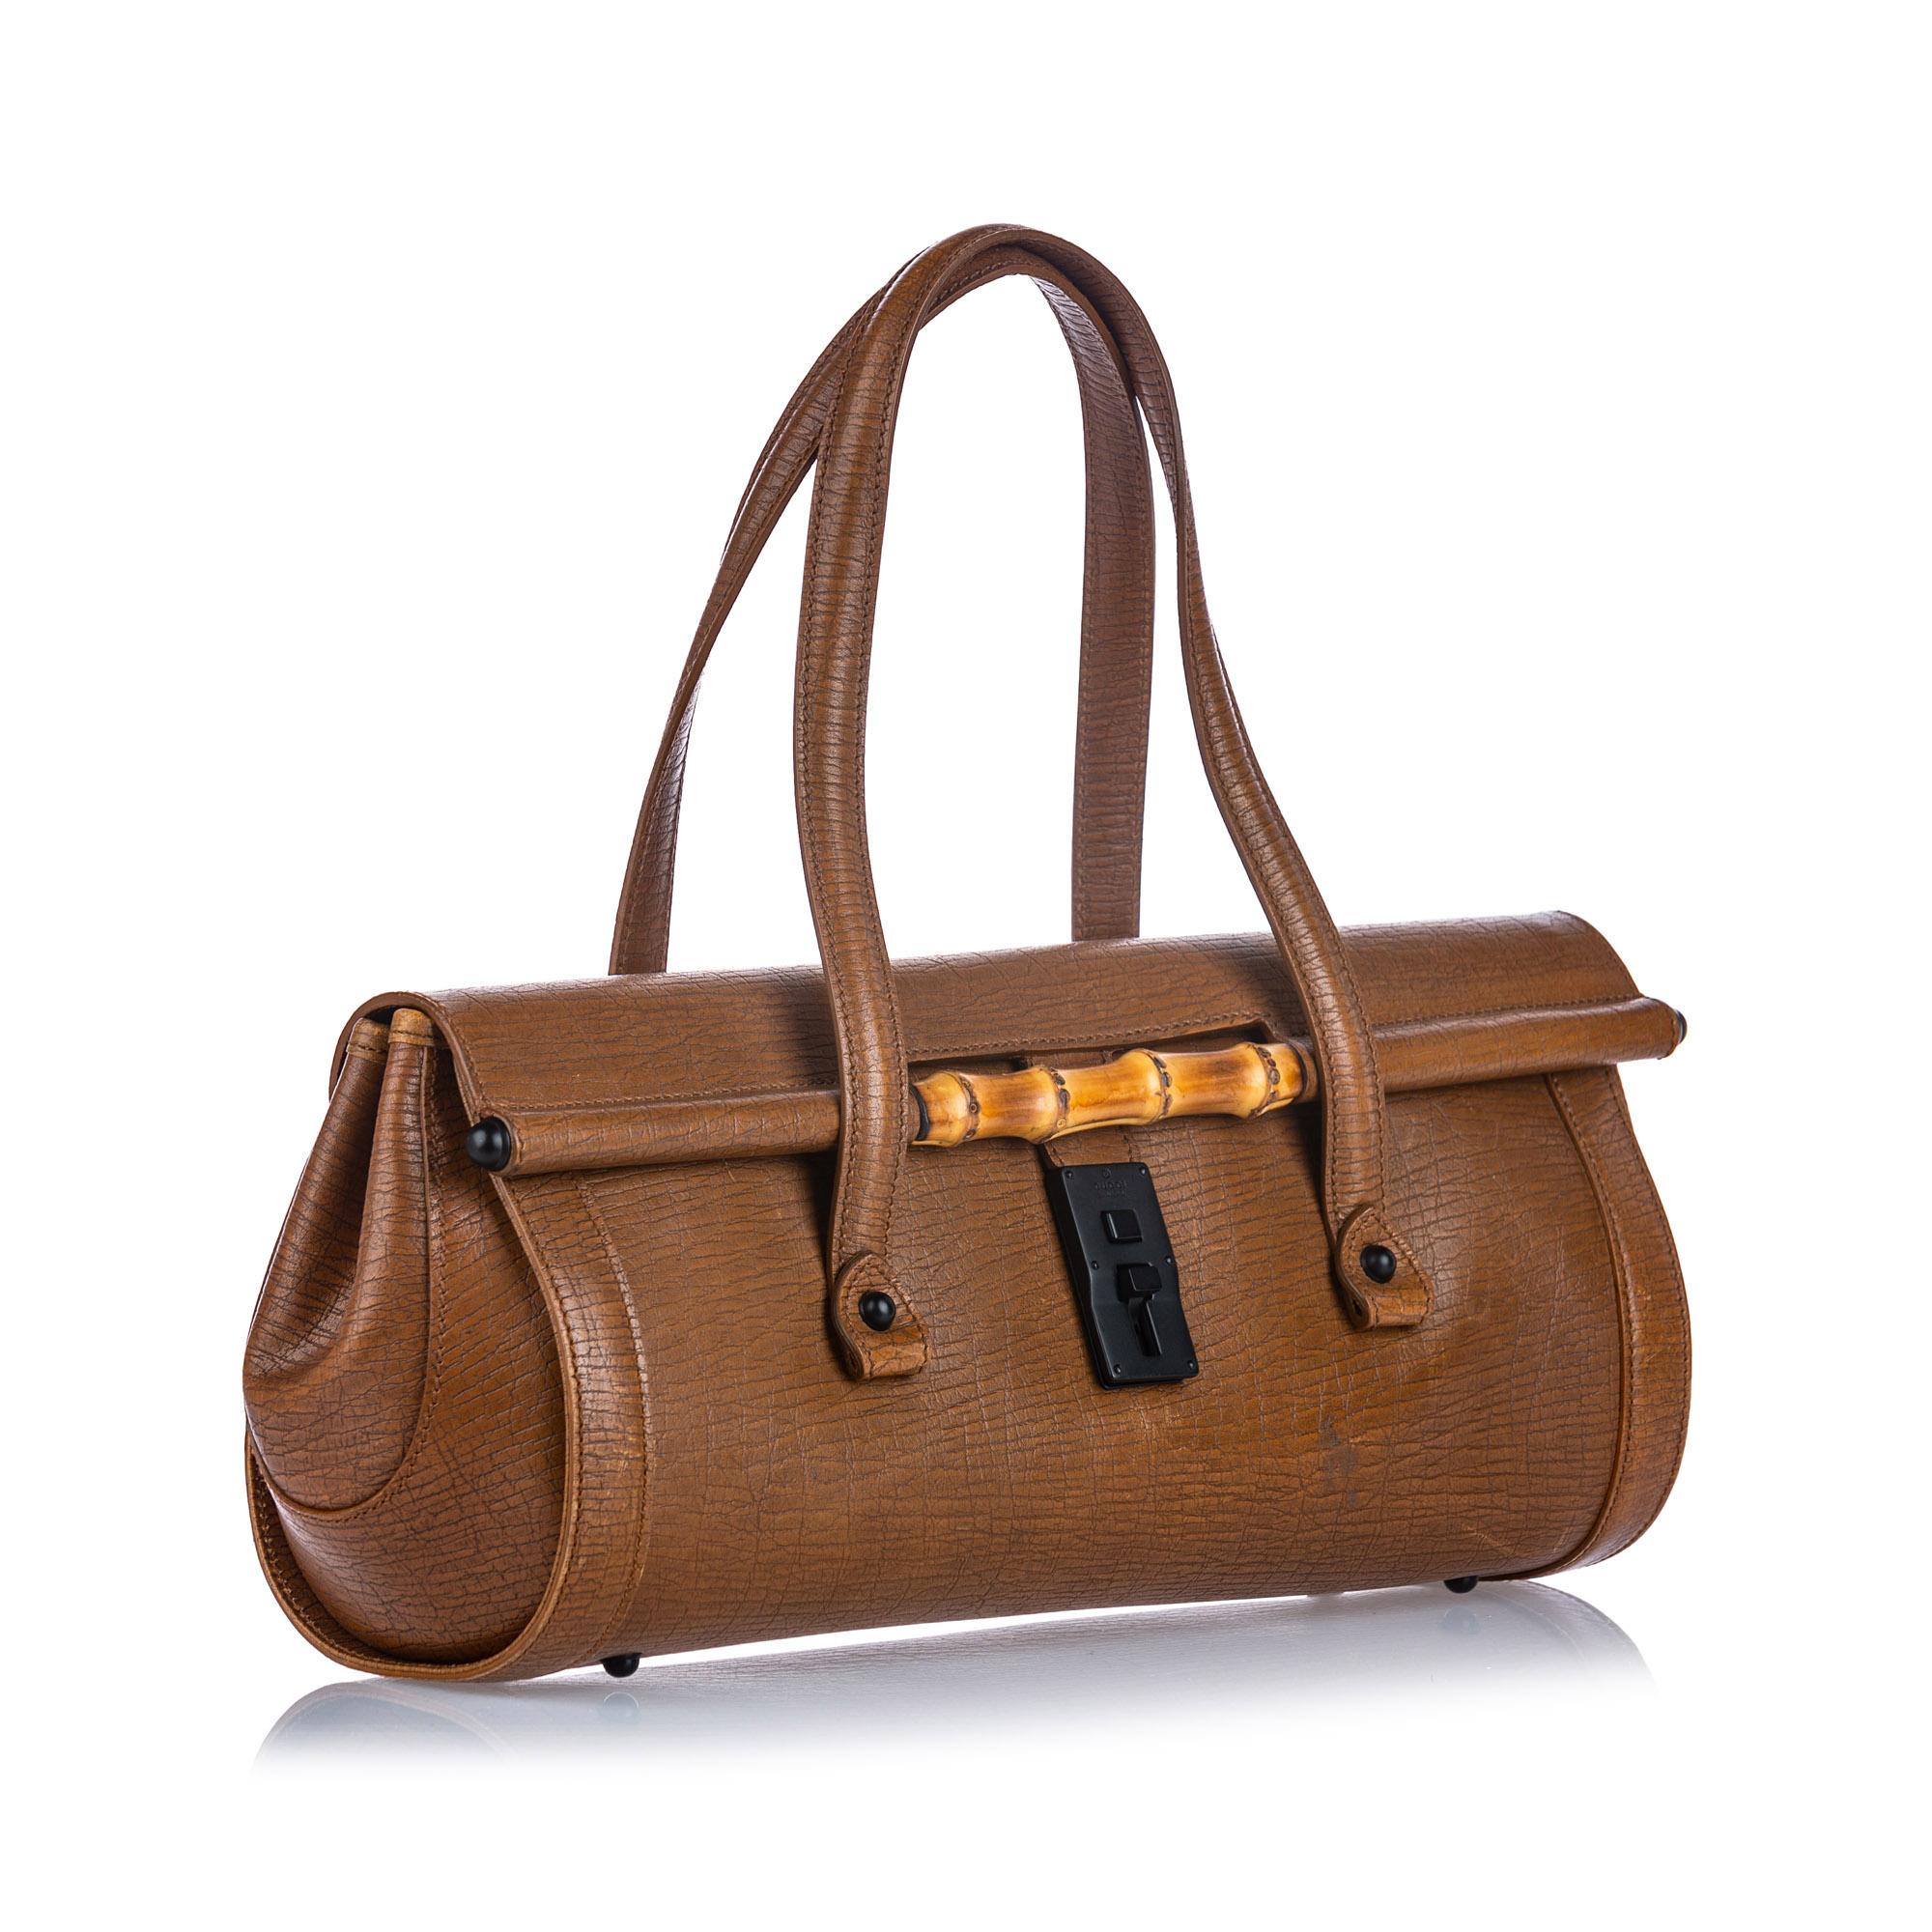 The Bamboo Bullet handbag features a leather body, flat leather handles, a front flap with a push lock closure, and an interior zip pocket. It carries as B condition rating.

Inclusions: 
Dust Bag
Dimensions:
Length: 18.00 cm
Width: 38.00 cm
Depth: